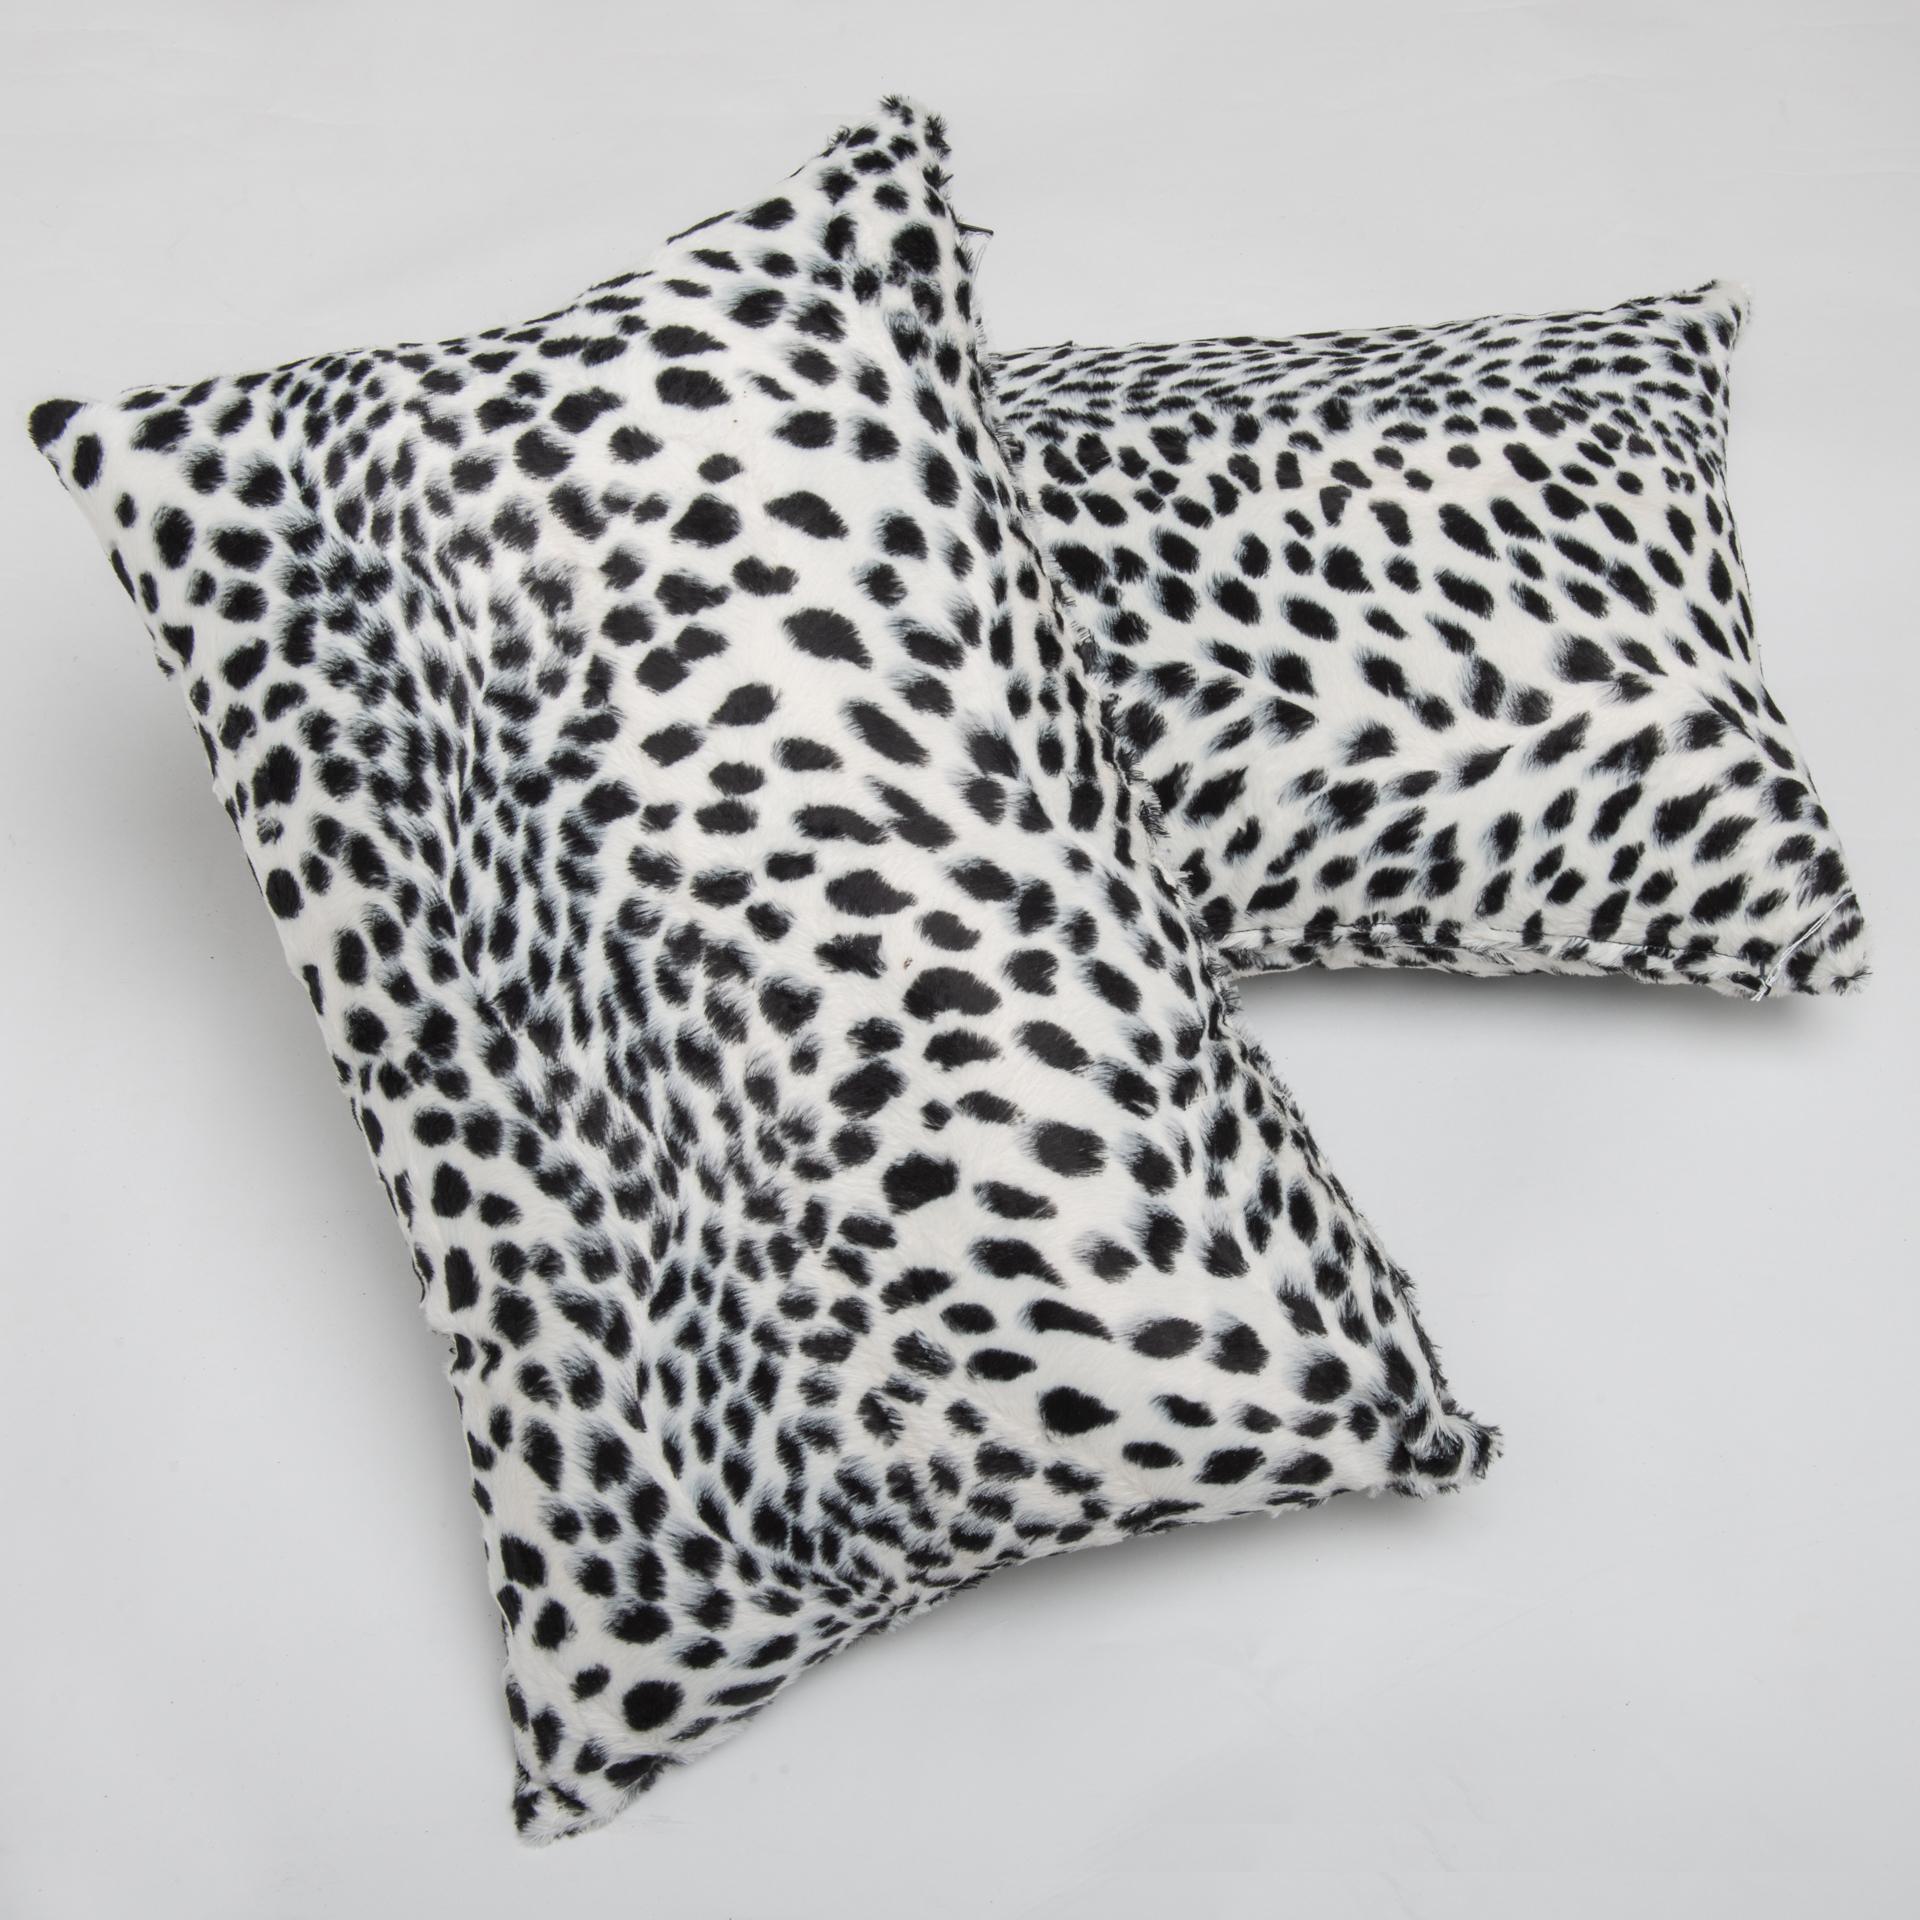 Other Pair of Pillows in Black and White Dalmatian Fabric For Sale